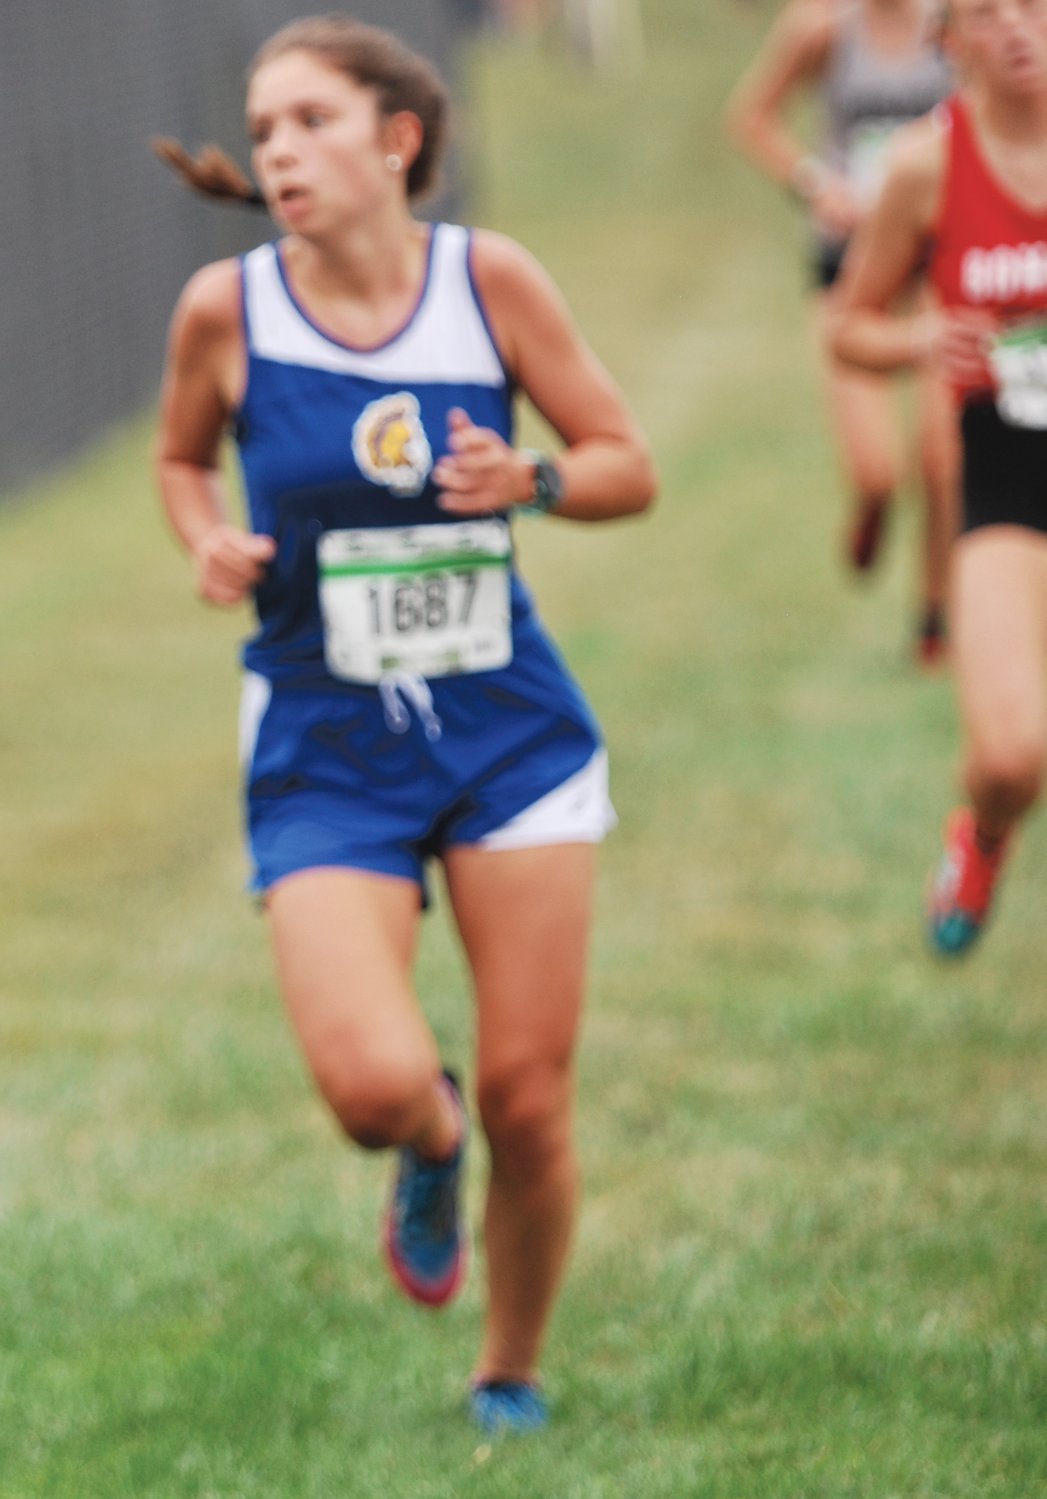 Crawfordsville's Shelby Greene led the Athenians with a 17th-place finish in 22:34.